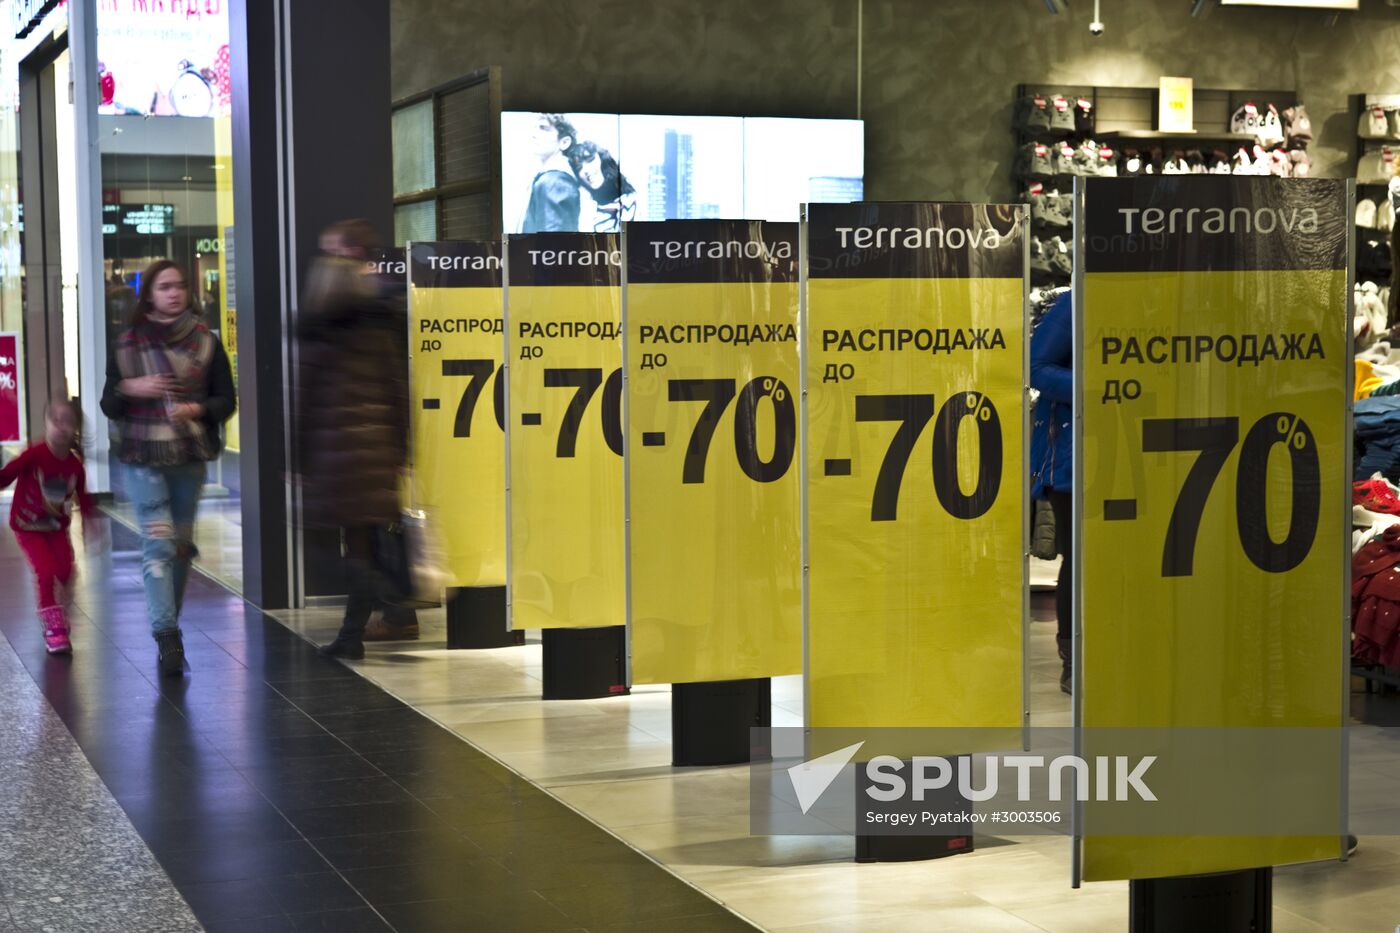 Sale at Moscow malls